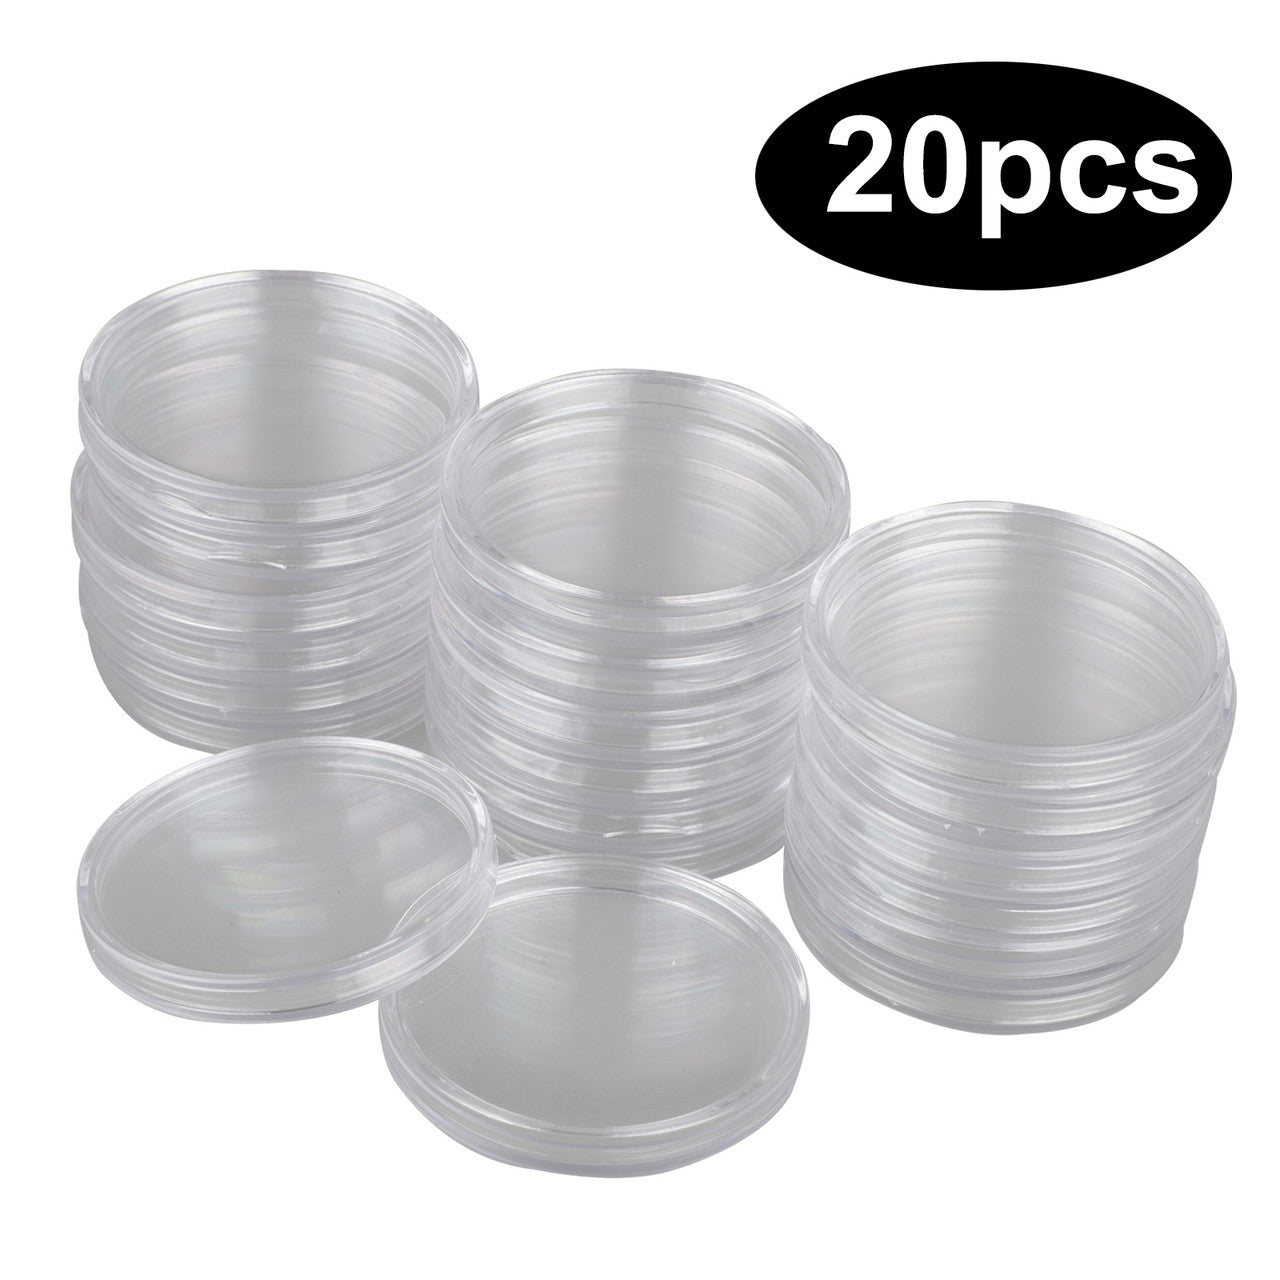 46mm Coin Collection Cases Storage Box Capsules, 5 Sizes (19/24/29/34/39 mm) EVA Protect Gasket, Clear Round Display Holder Organizer Container for Collectors, 20Pcs